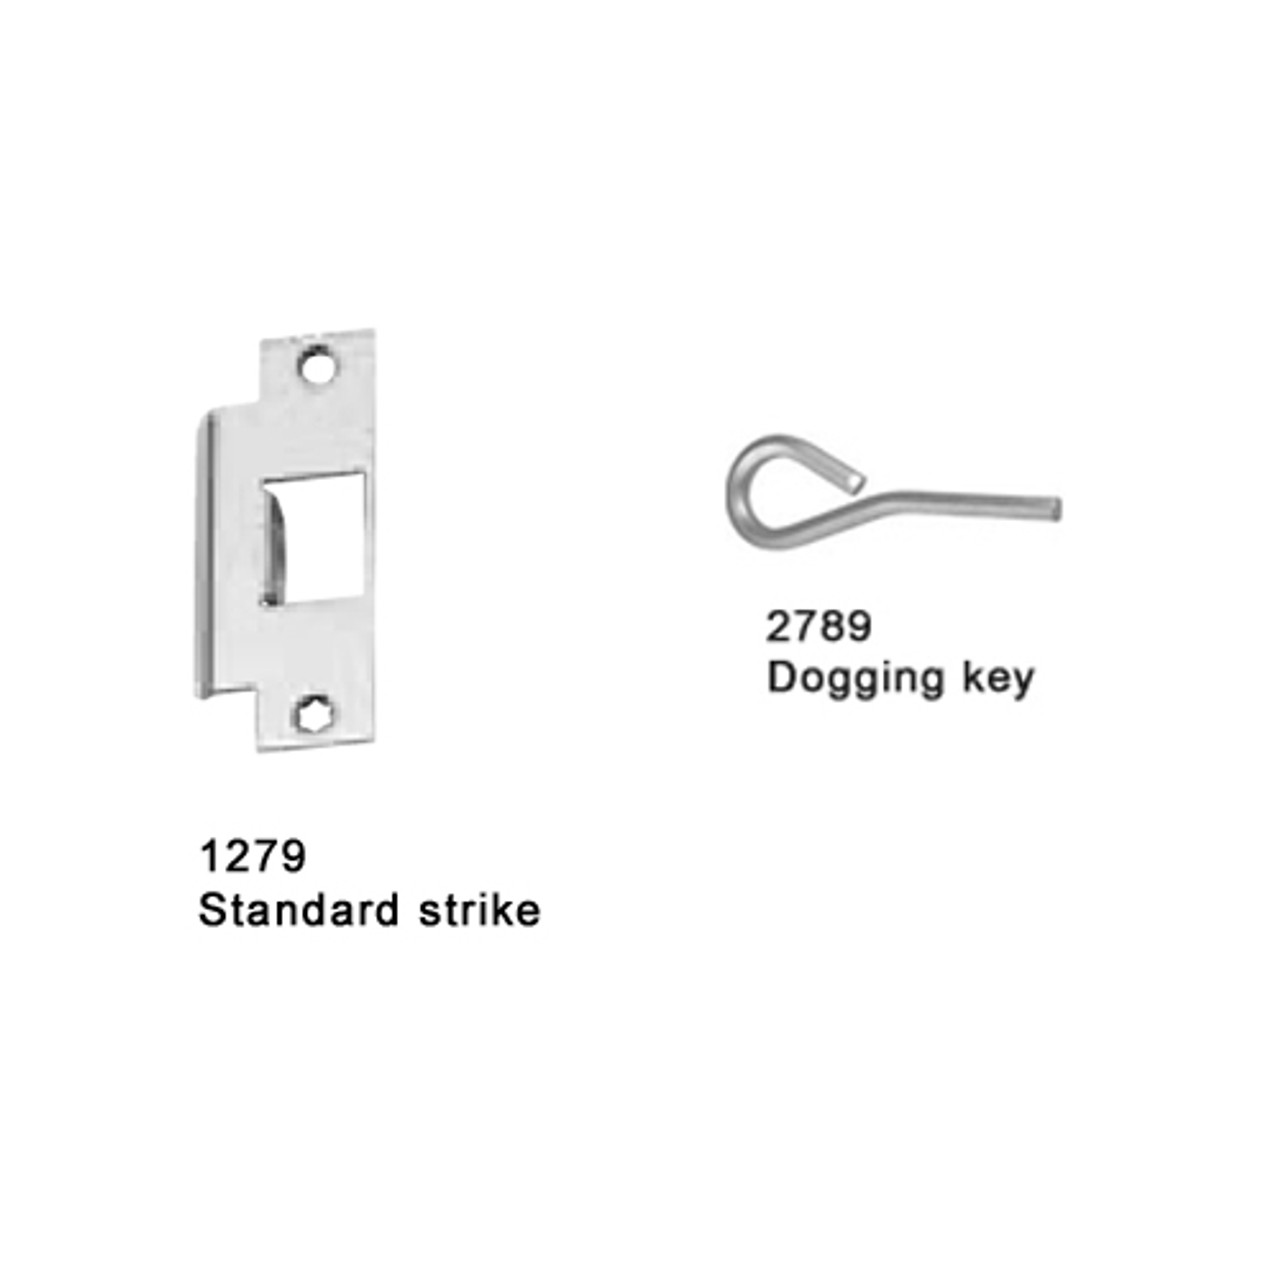 25-M-L-DT-DANE-US32-3-LHR Falcon 25 Series Mortise Lock Devices 510L-DT Dane Lever Trim with Dummy Trim in Polished Stainless Steel